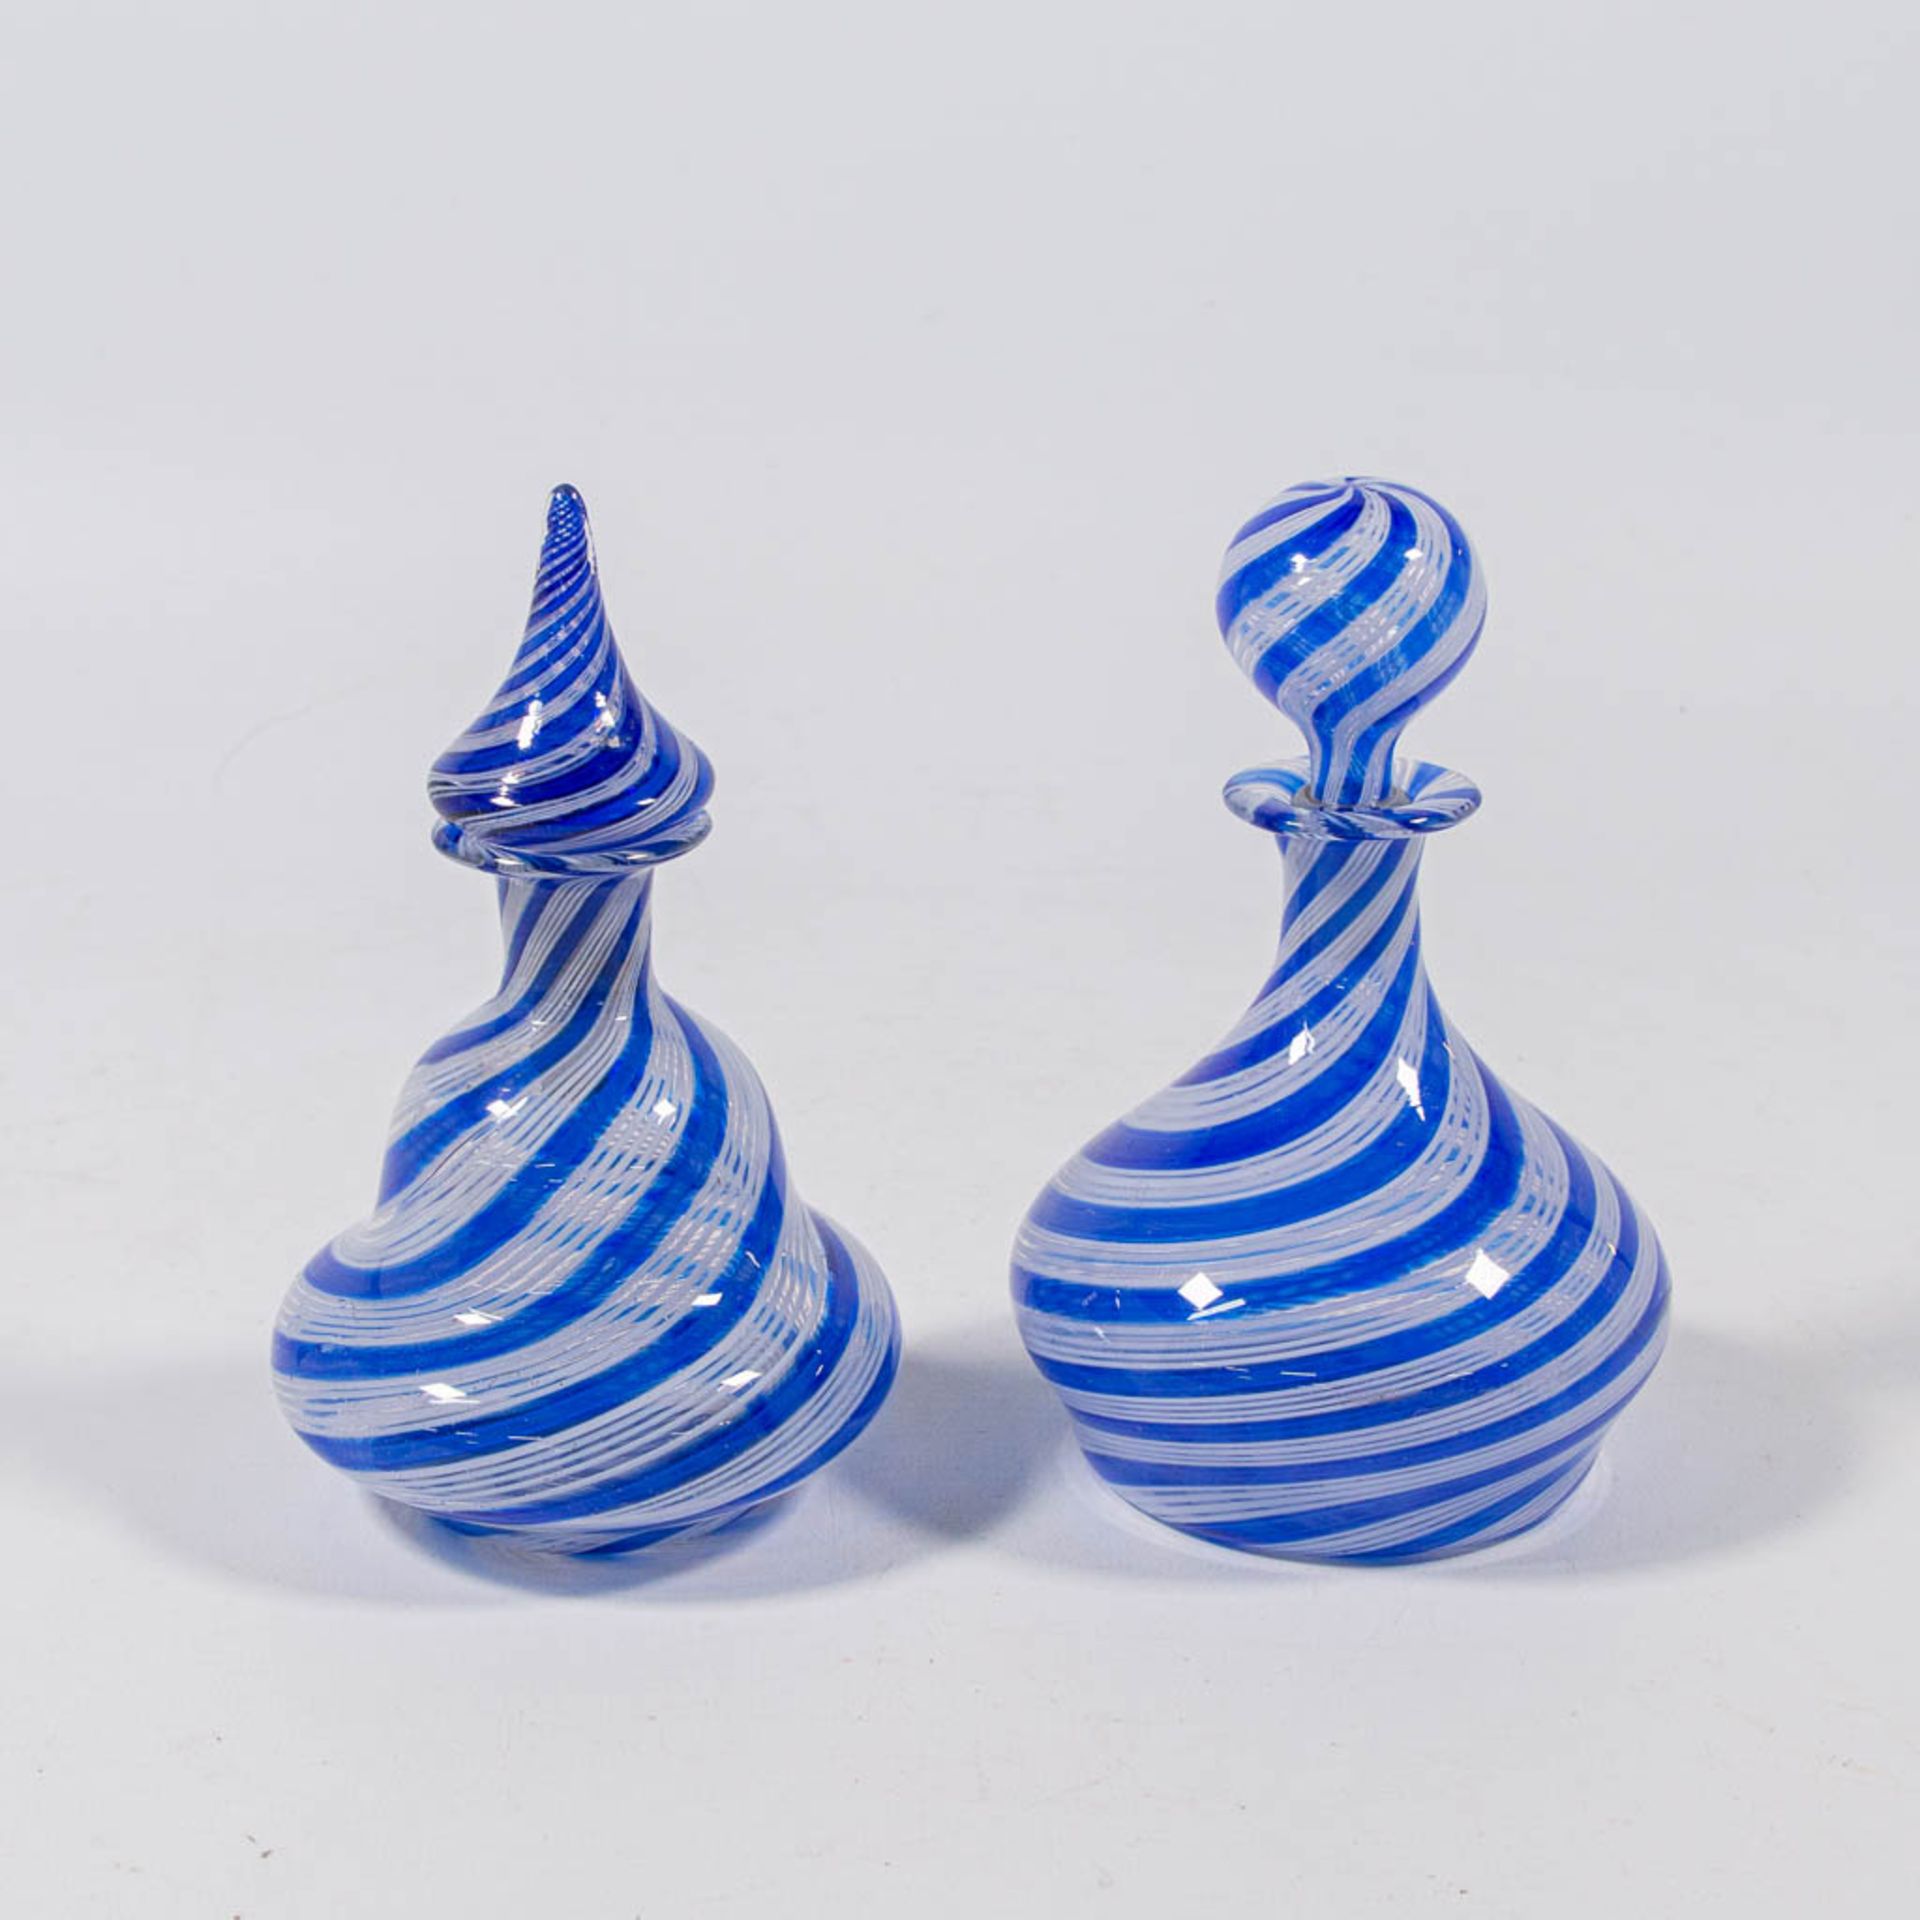 A pair of  decanters with stopper, made in Murano, Italy around 1950. (15 x 9 cm) - Bild 4 aus 17